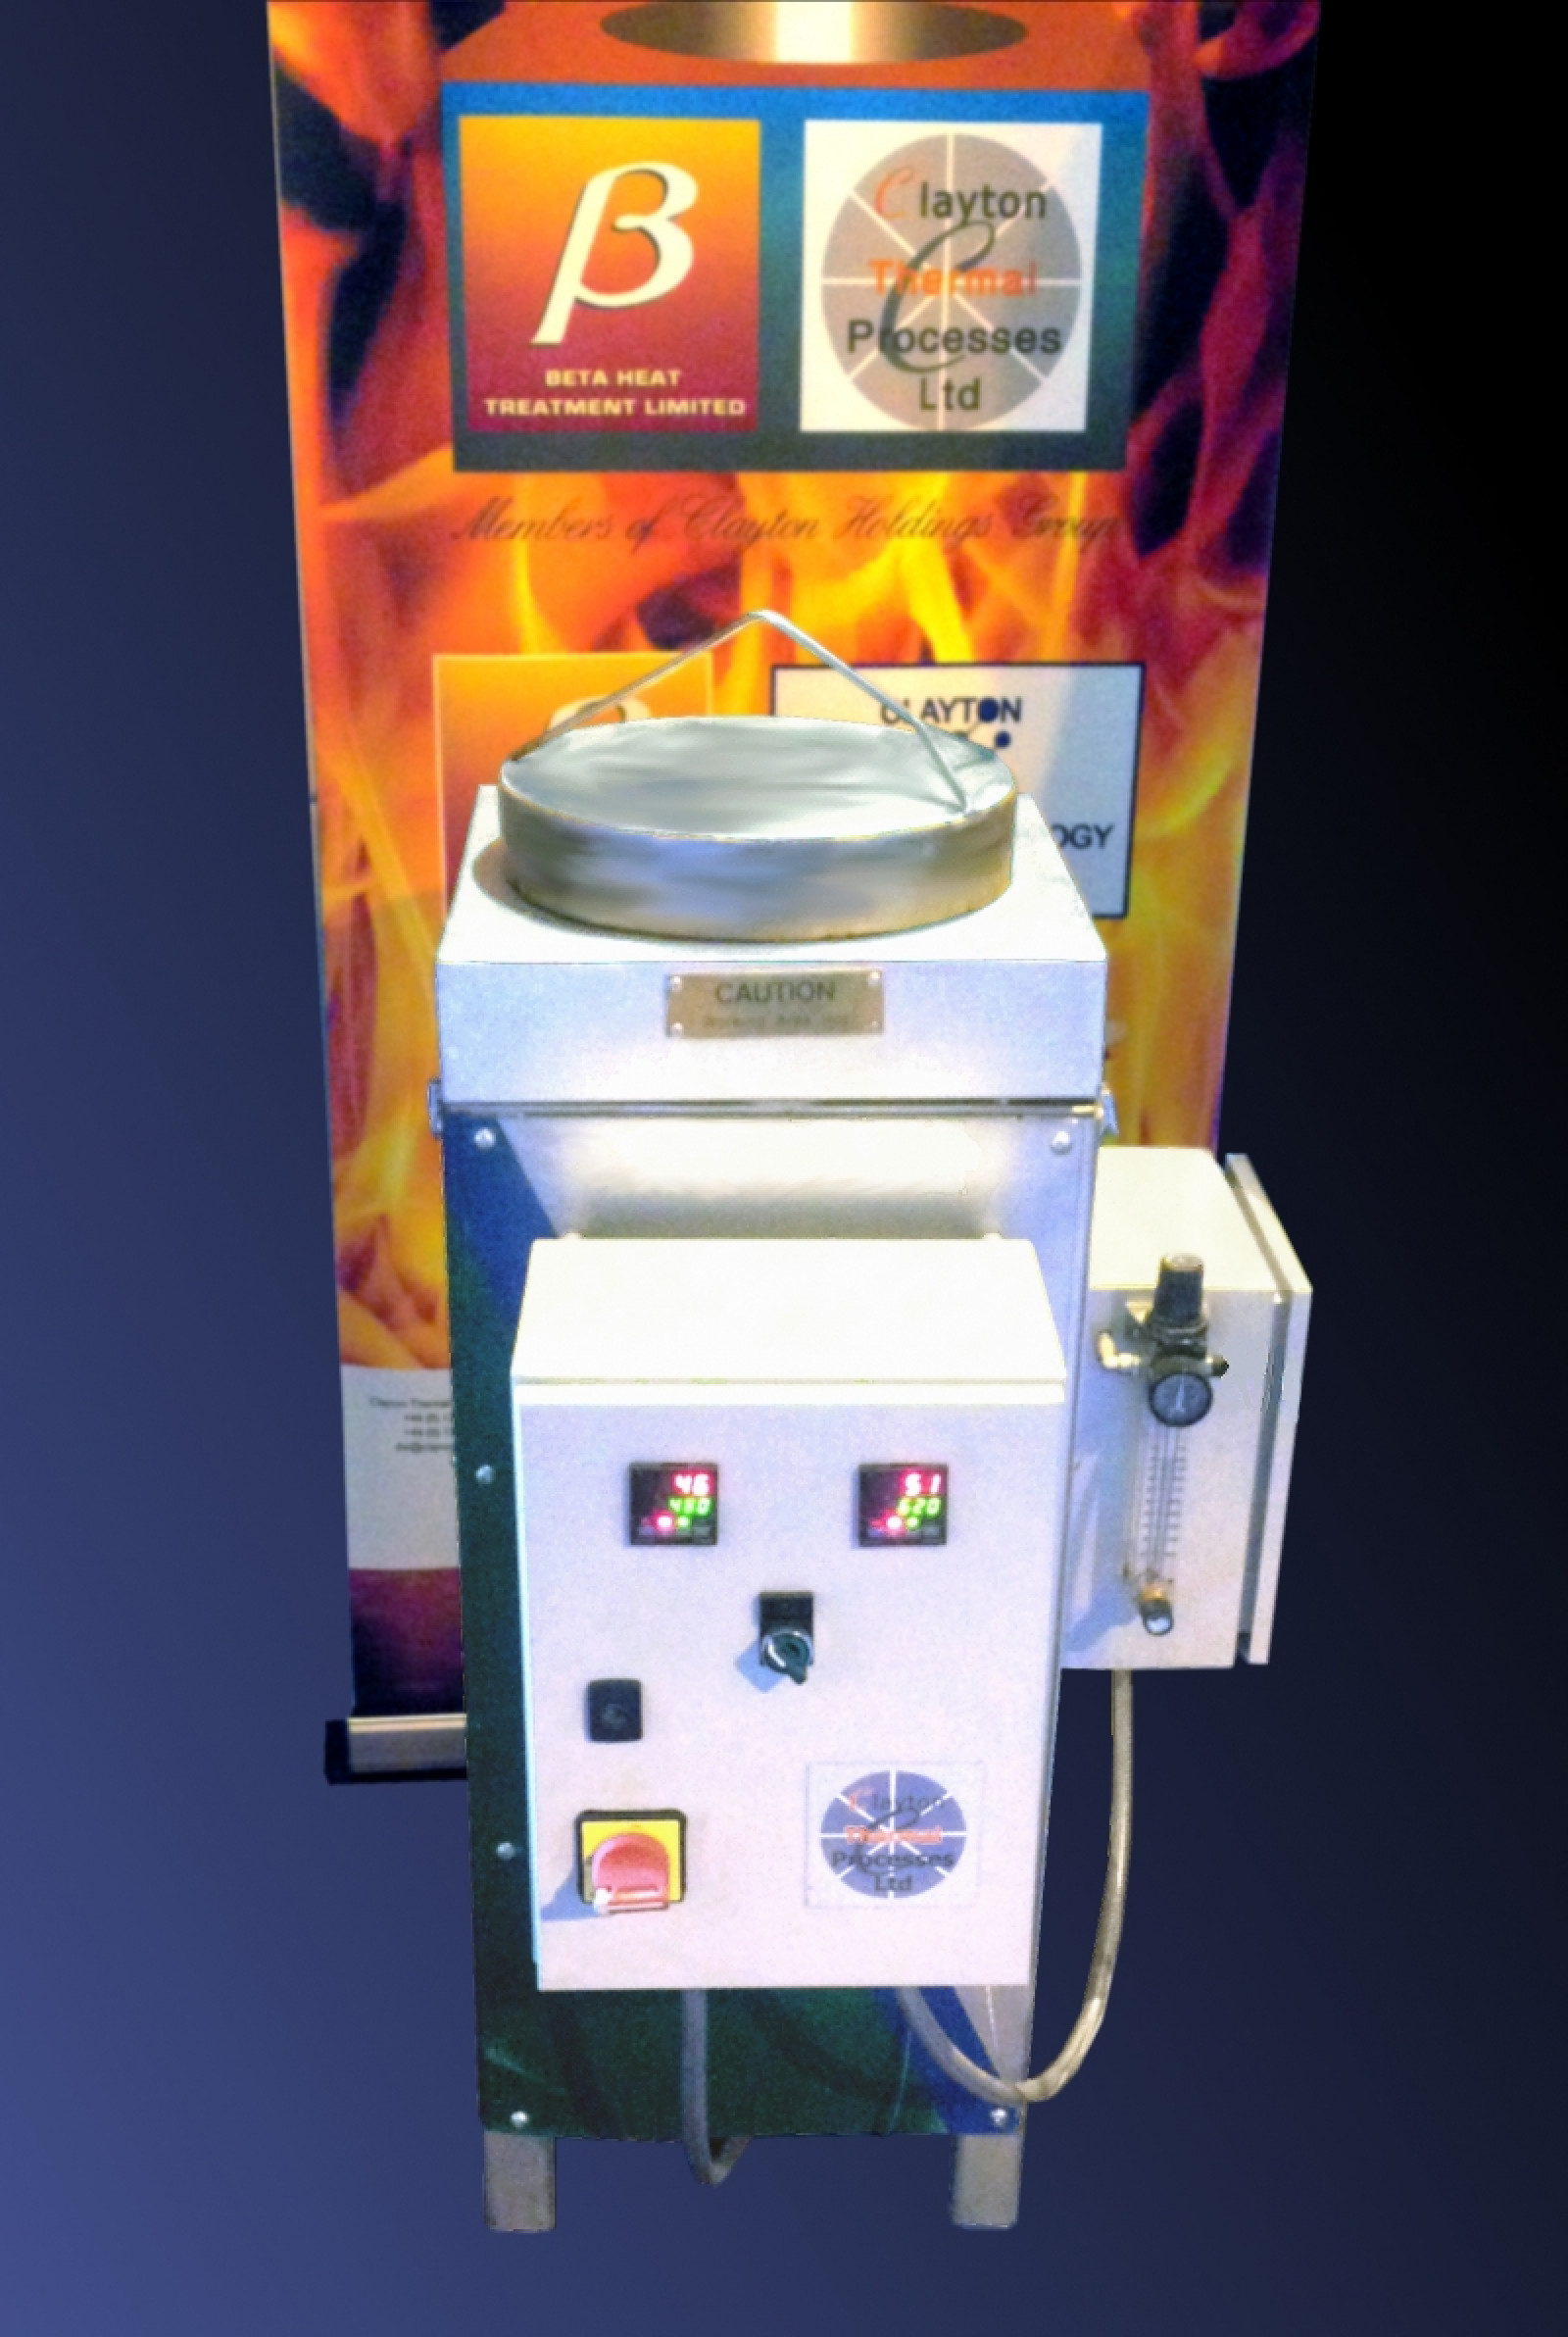 VIDEO: Introducing the 'CF' Range of thermal cleaning furnaces